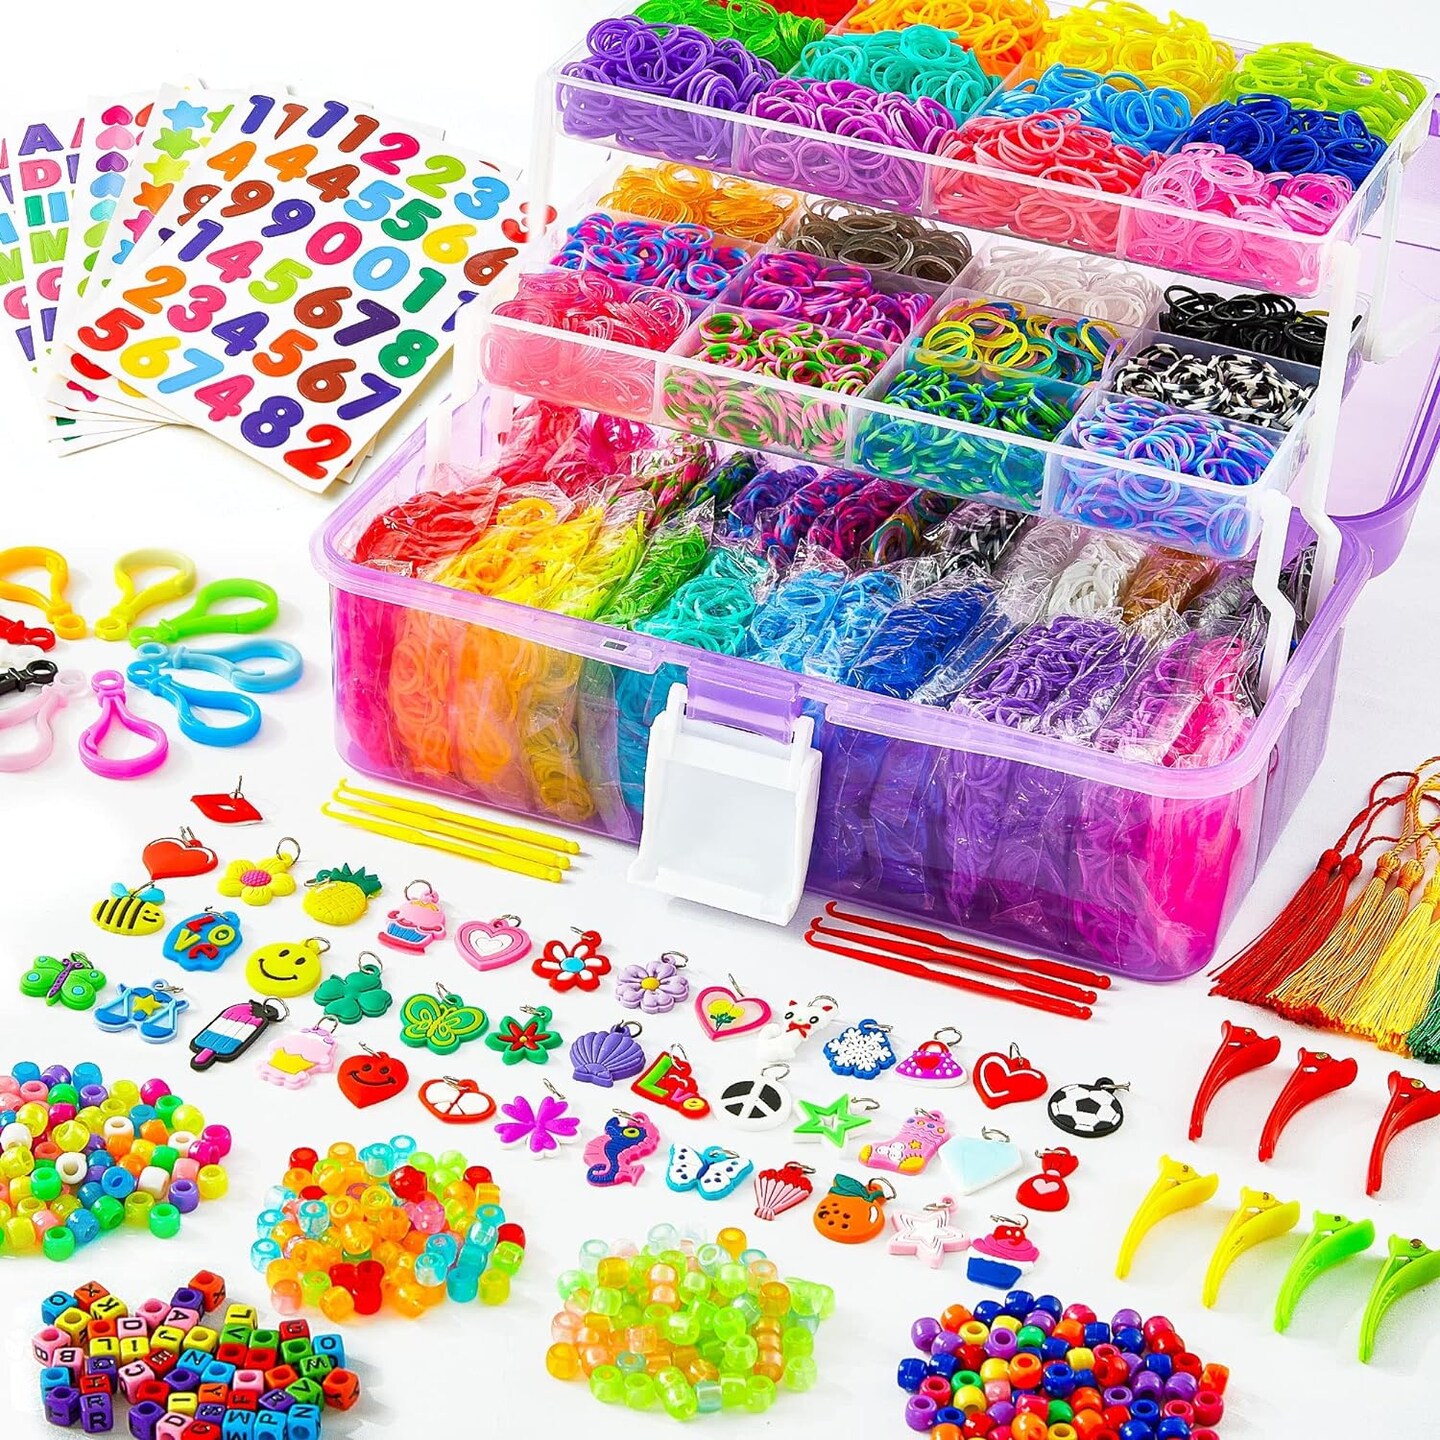 17500+ Rubber Loom Bands with 3 Layer Container, 28 Colors, 600 S-Clips, 352 Beads, 40 Cartoon Pendant, Bracelet Making Refill Kit for Kids